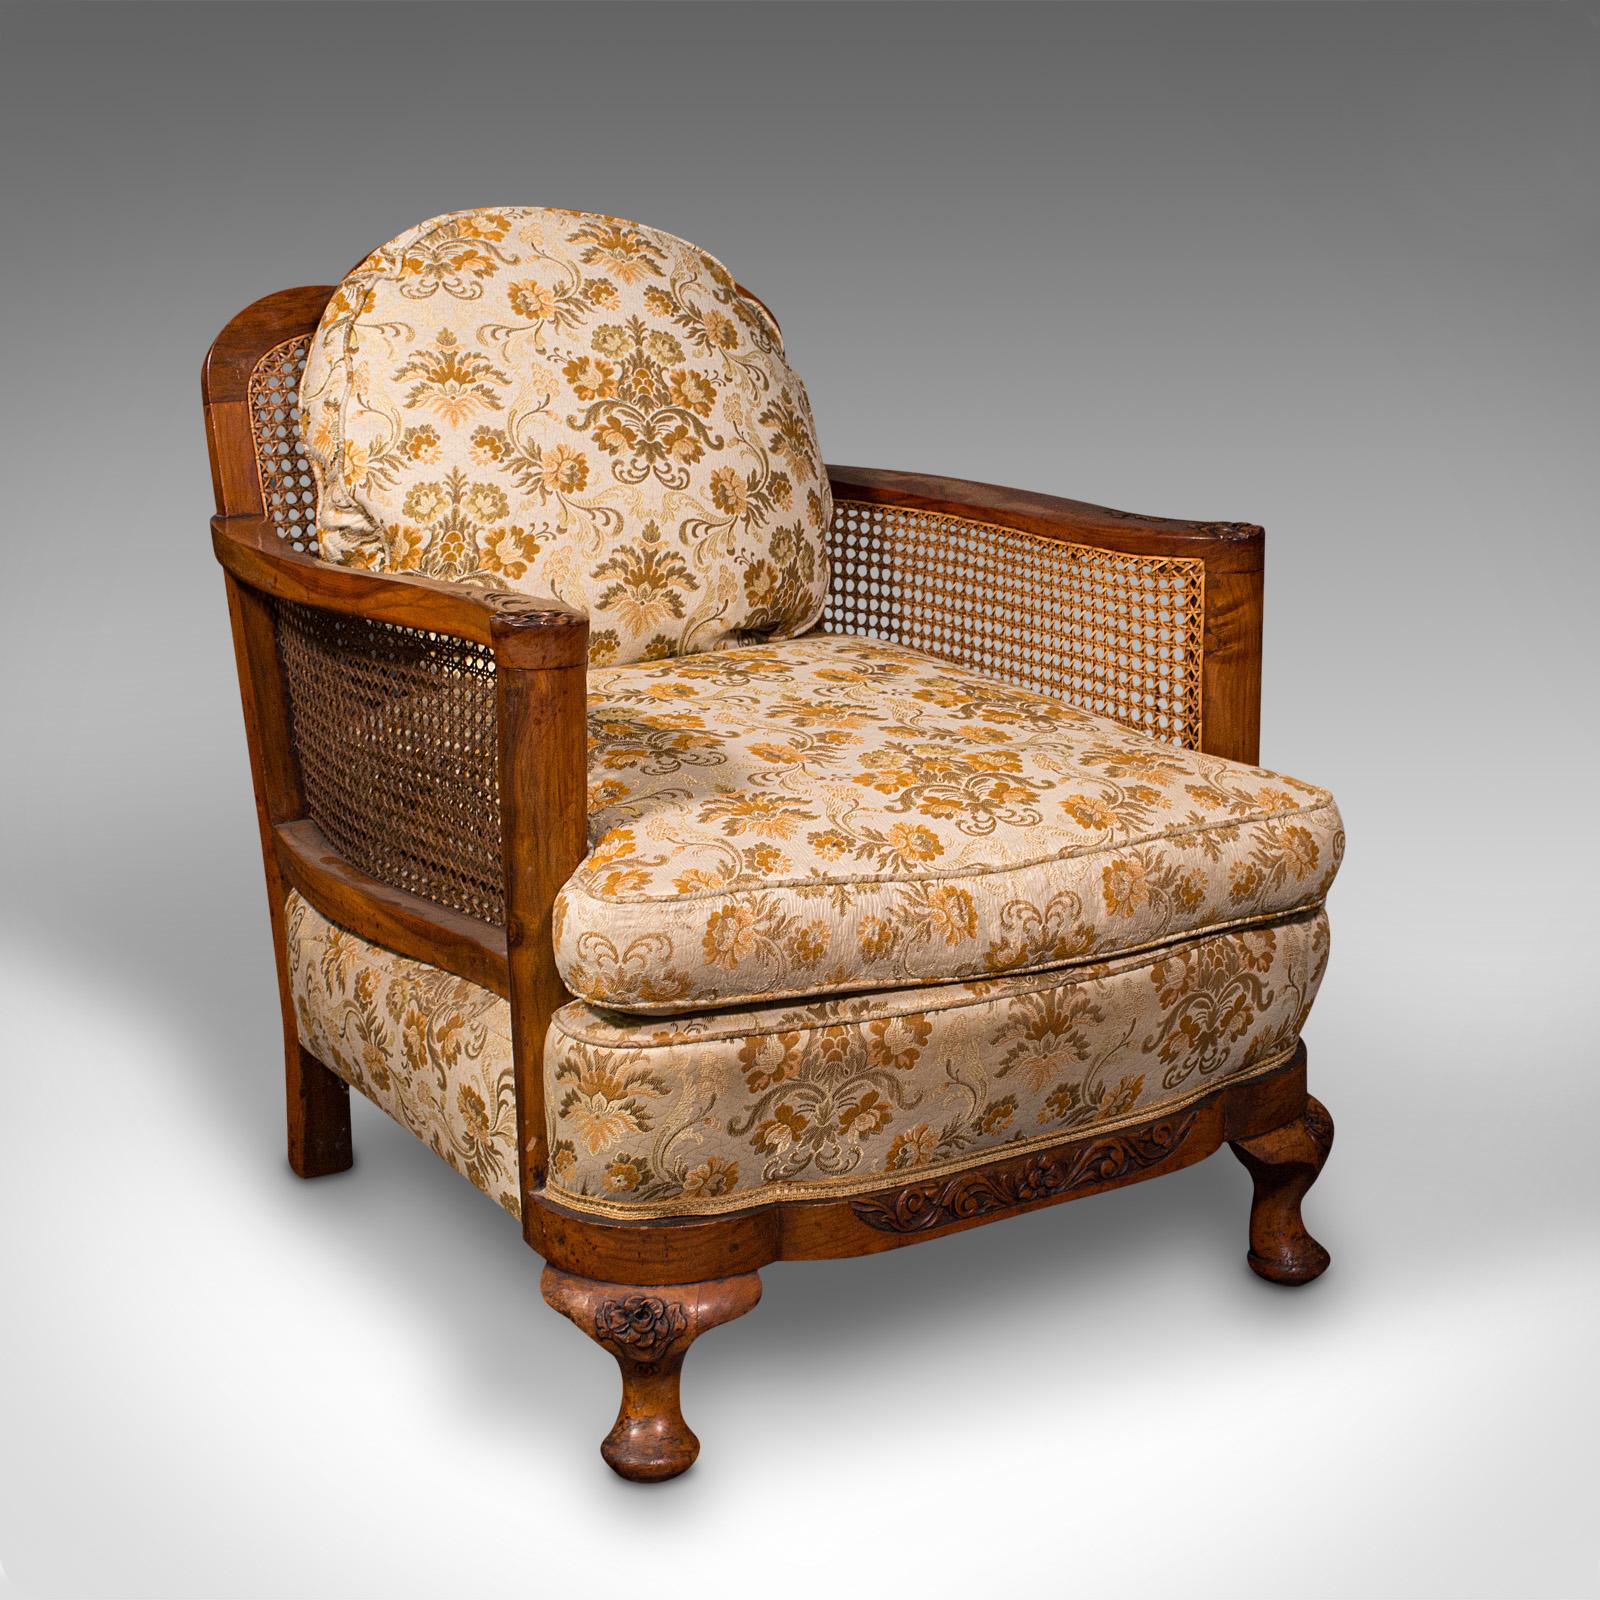 This is an antique bergère sofa suite. An English, walnut 3-seat settee and pair of armchairs, dating to the Edwardian period, circa 1910.

Wonderfully presented antique suite with quality finish and appearance
Displaying a desirable aged patina